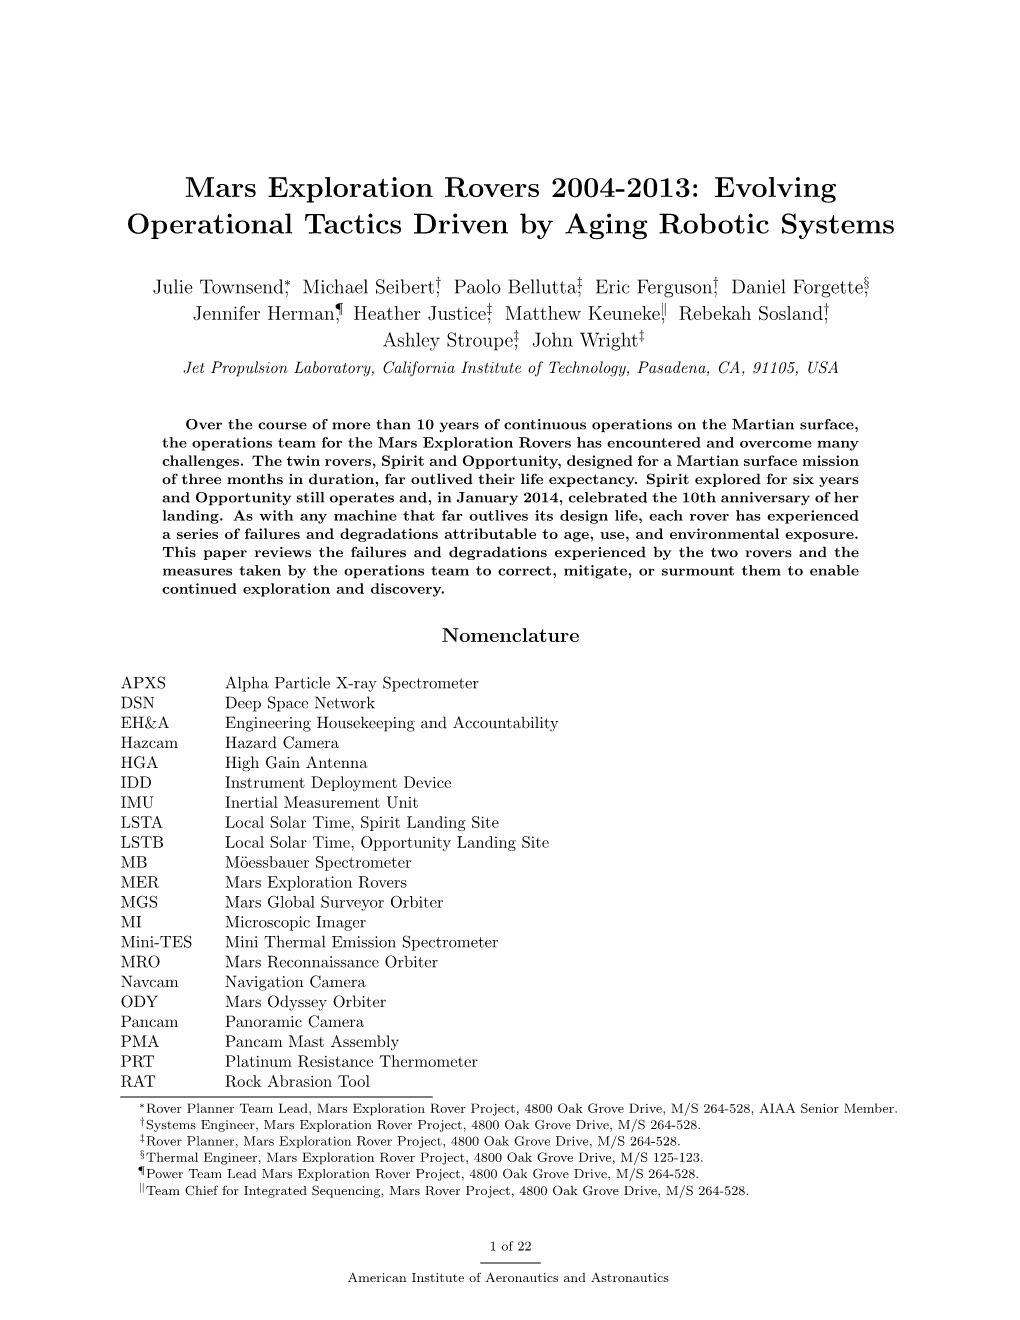 Mars Exploration Rovers 2004-2013: Evolving Operational Tactics Driven by Aging Robotic Systems